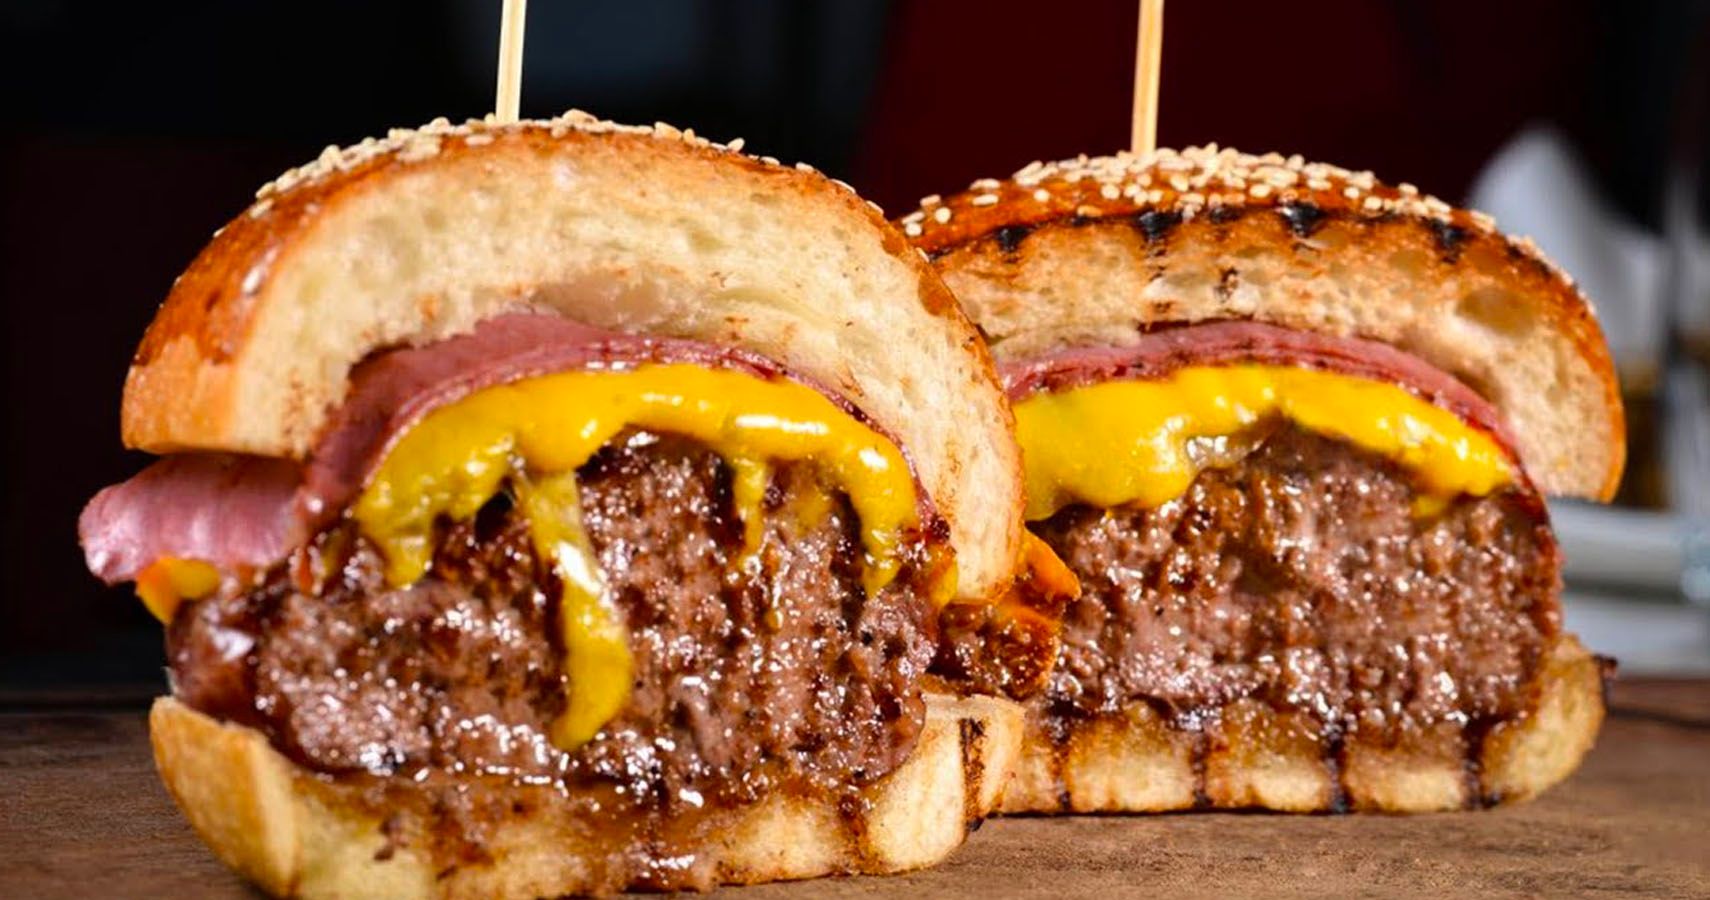 12 Of The World’s Best Burgers And Where To Find Them